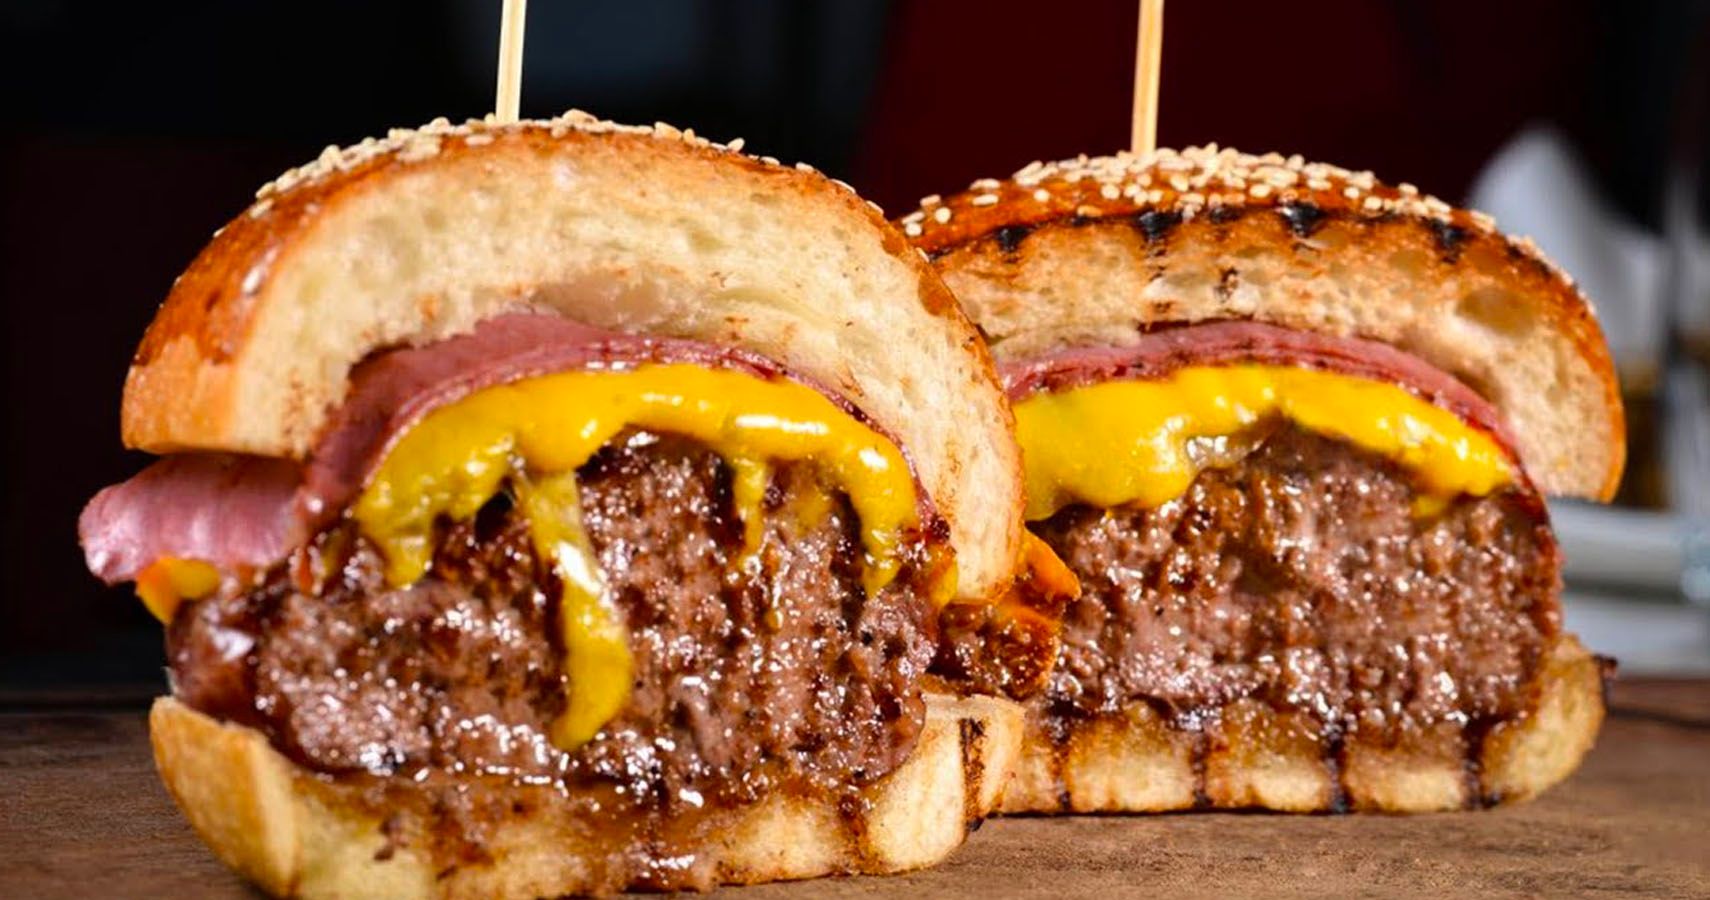 12 Of The World’s Best Burgers And Where To Find Them